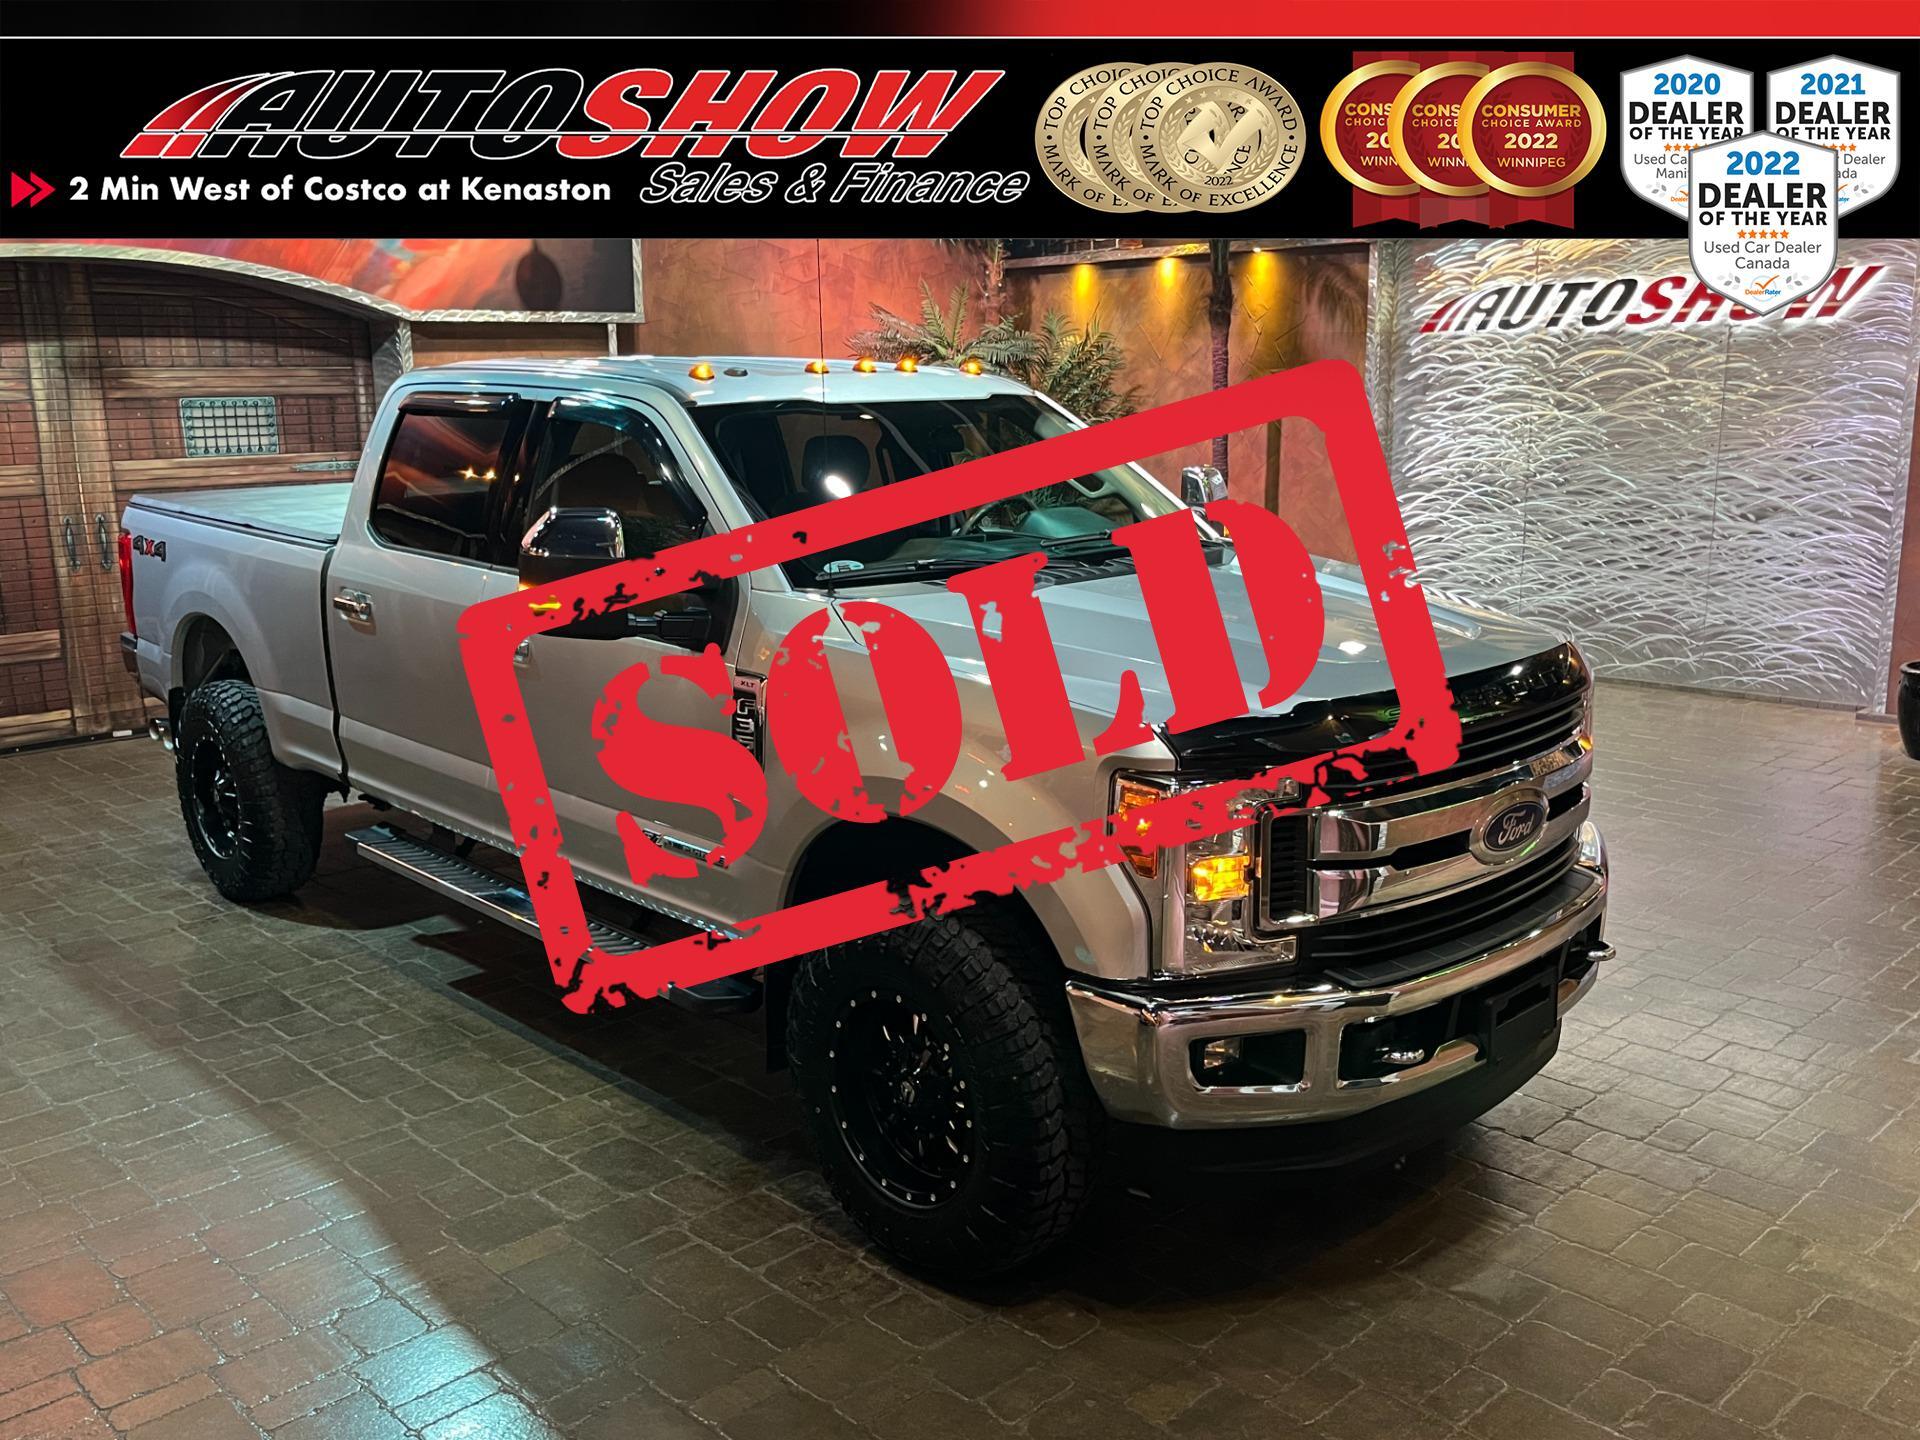 2019 Ford F-350 Diesel - One Owner, Htd Seats, Pwr Mirrs, Tonneau